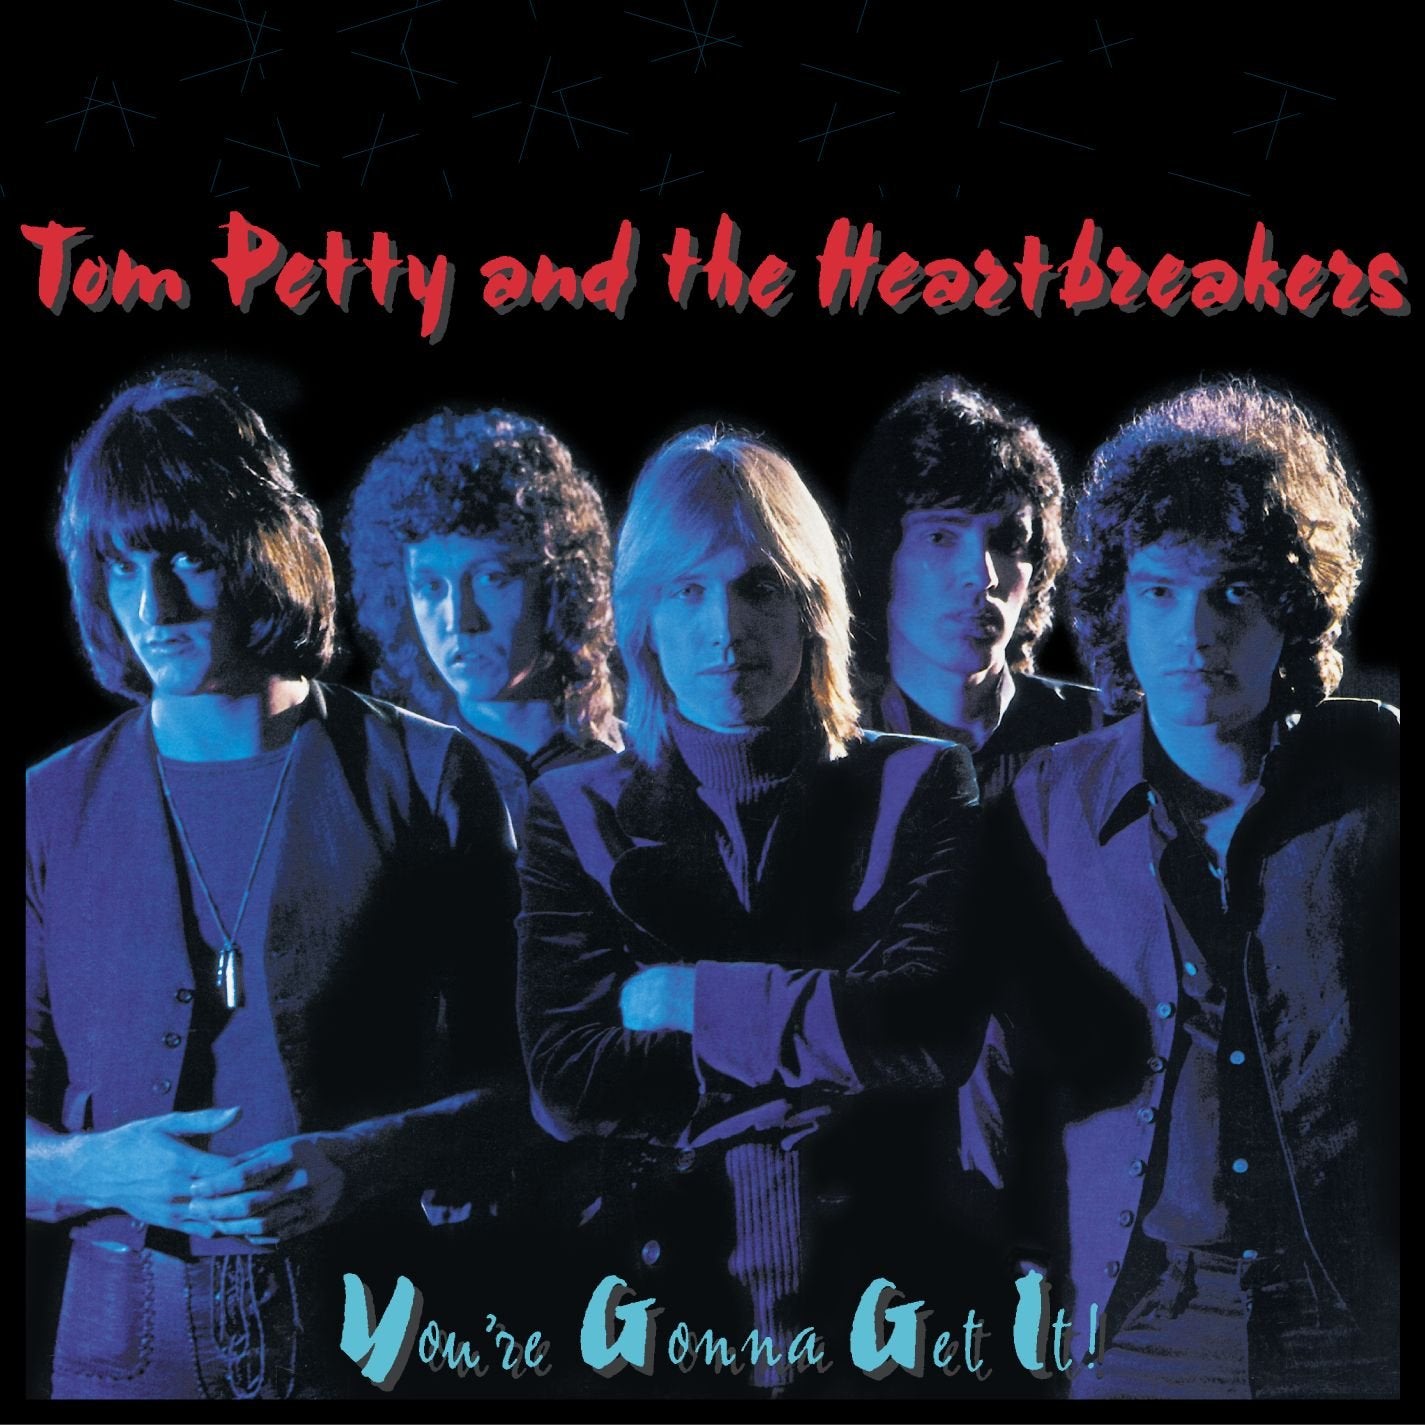 PETTY, TOM AND THE HEARTBREAKERS – You're Gonna Get It!